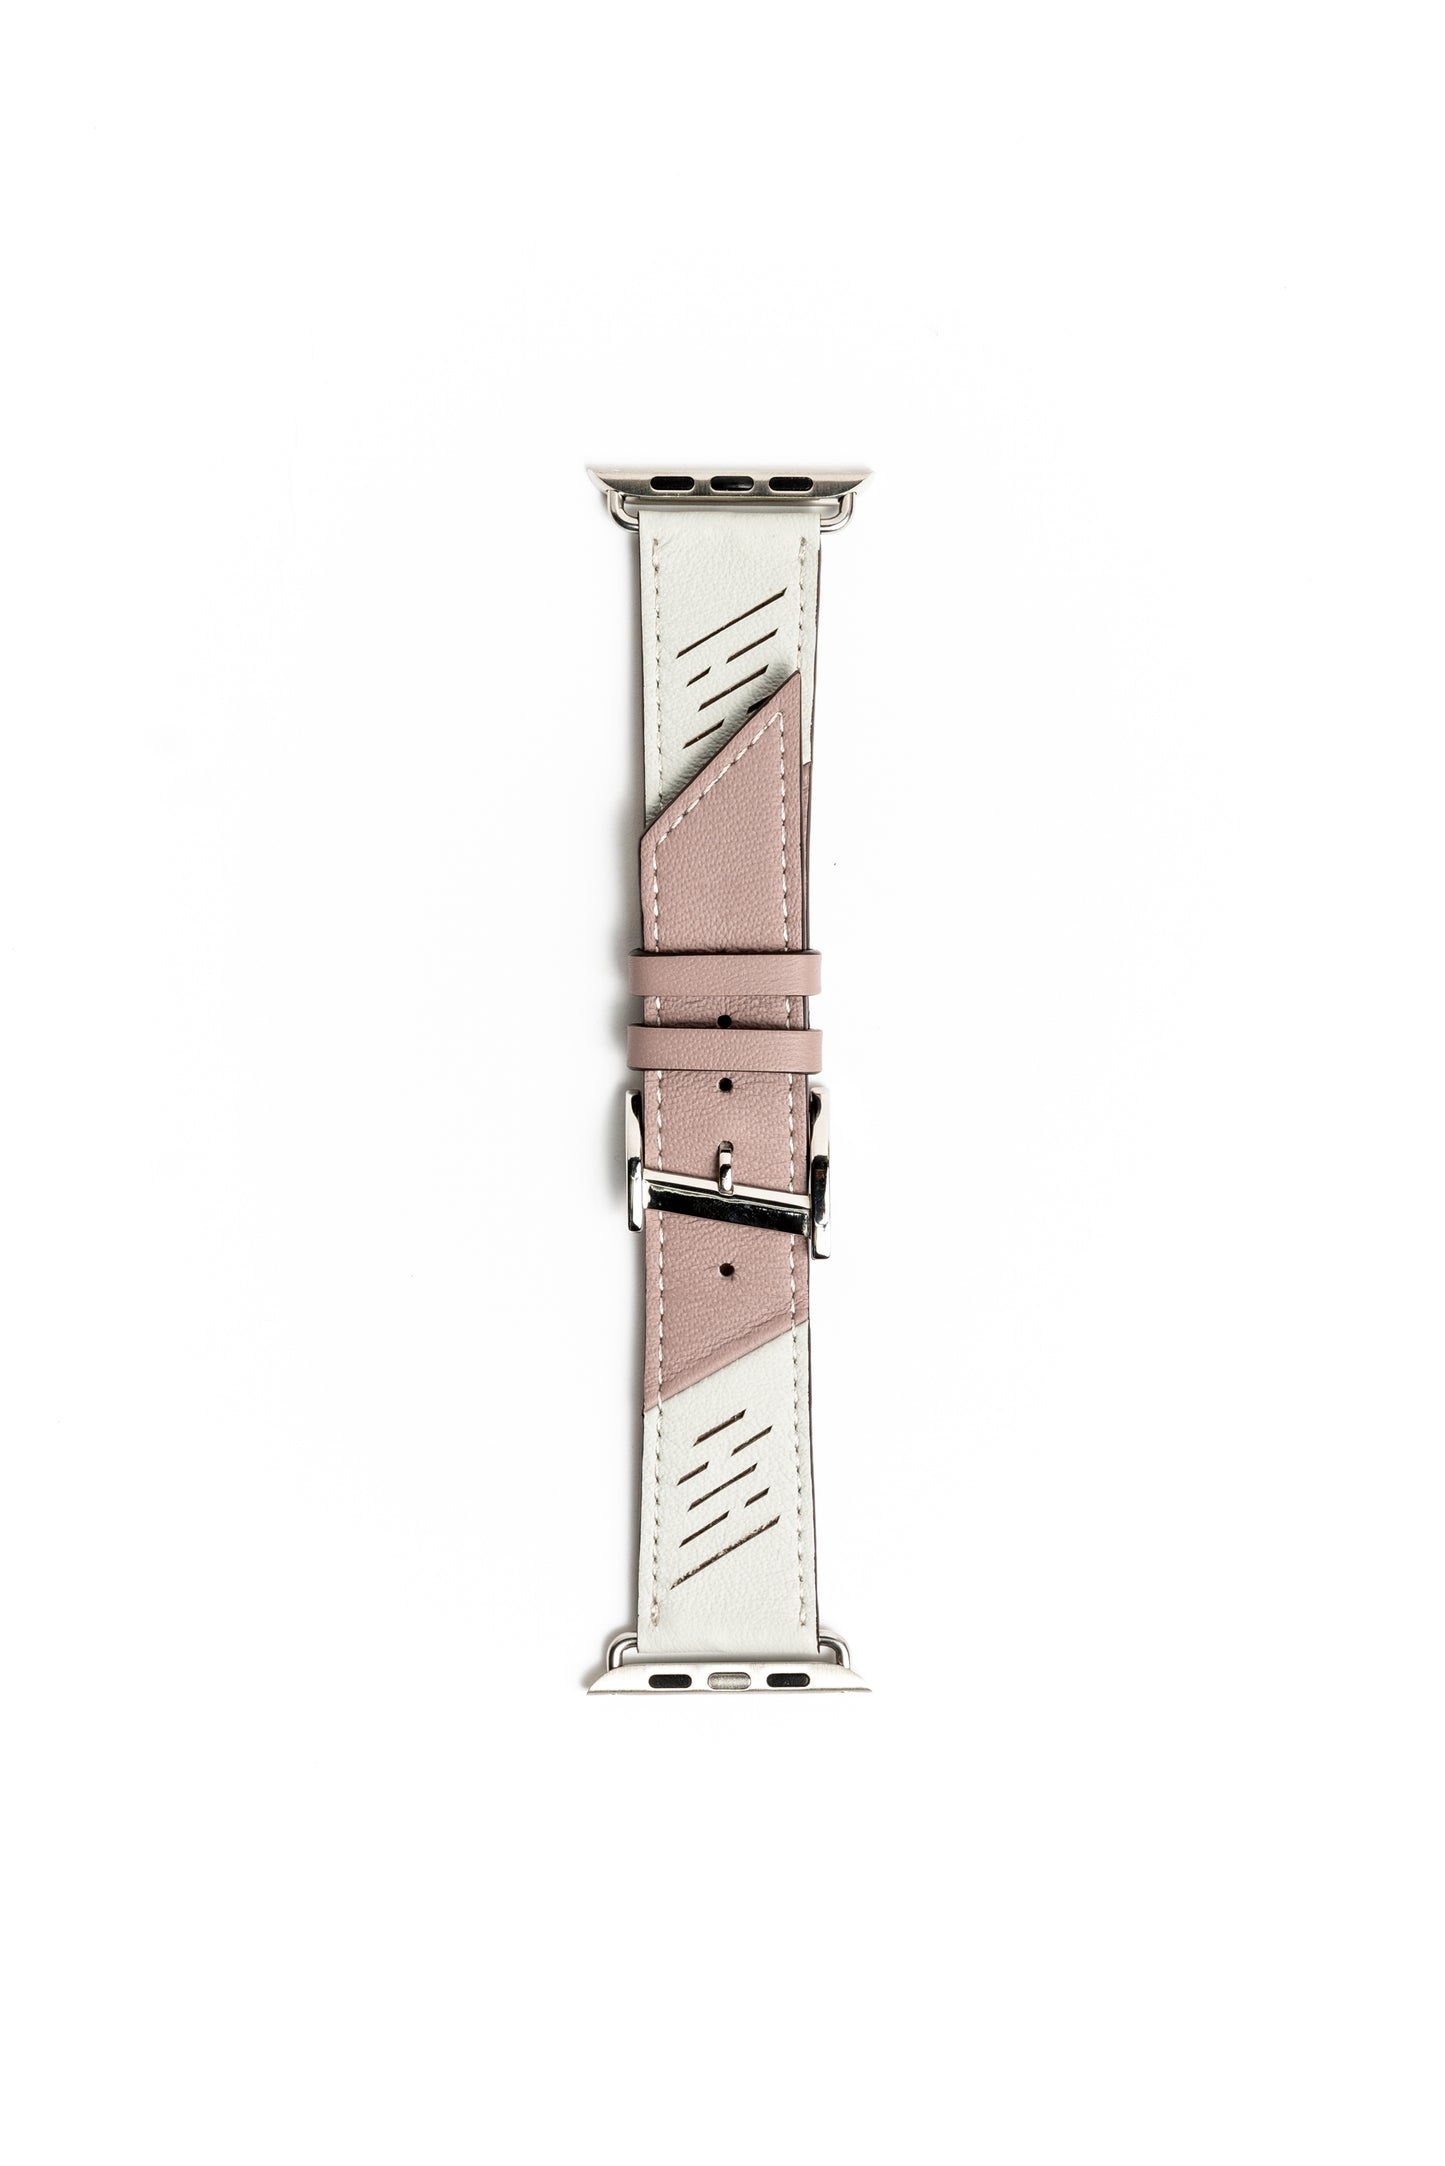 Louis Vuitton monogram leather strap for watches brown & pink 20mm - Louis  Vuitton